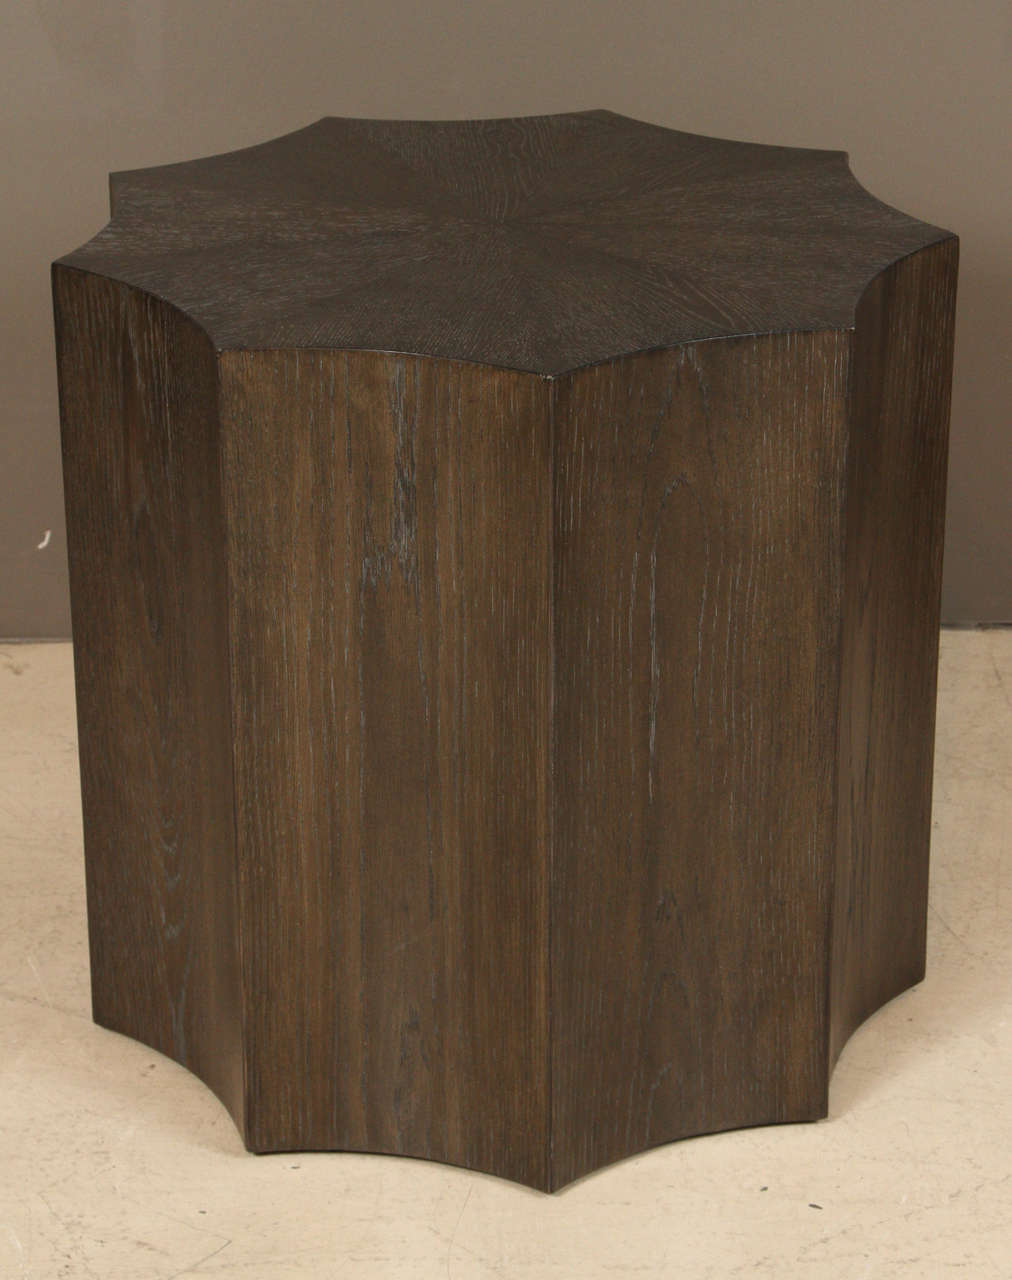 Normandie side table by Lawson-Fenning.